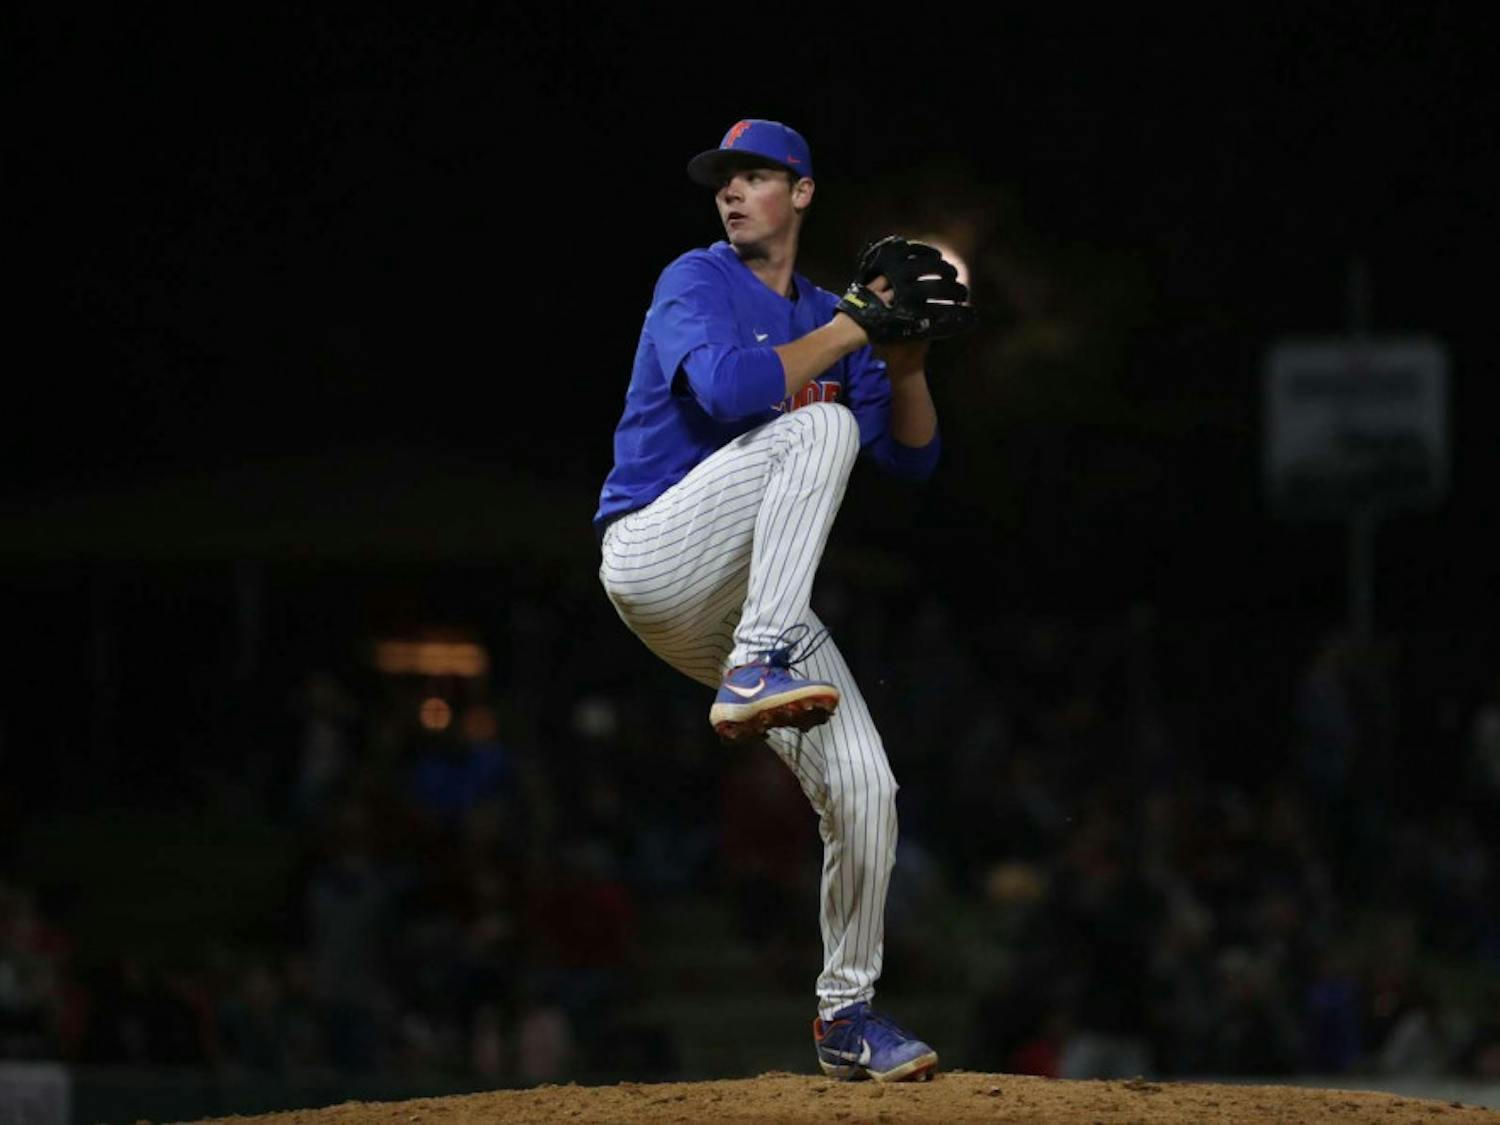 Hunter Barco, a 19-year-old UF business administration freshman, pitches in an exhibition game against Georgia. Barco allowed four runs in a 5-2 loss to the Hurricanes.